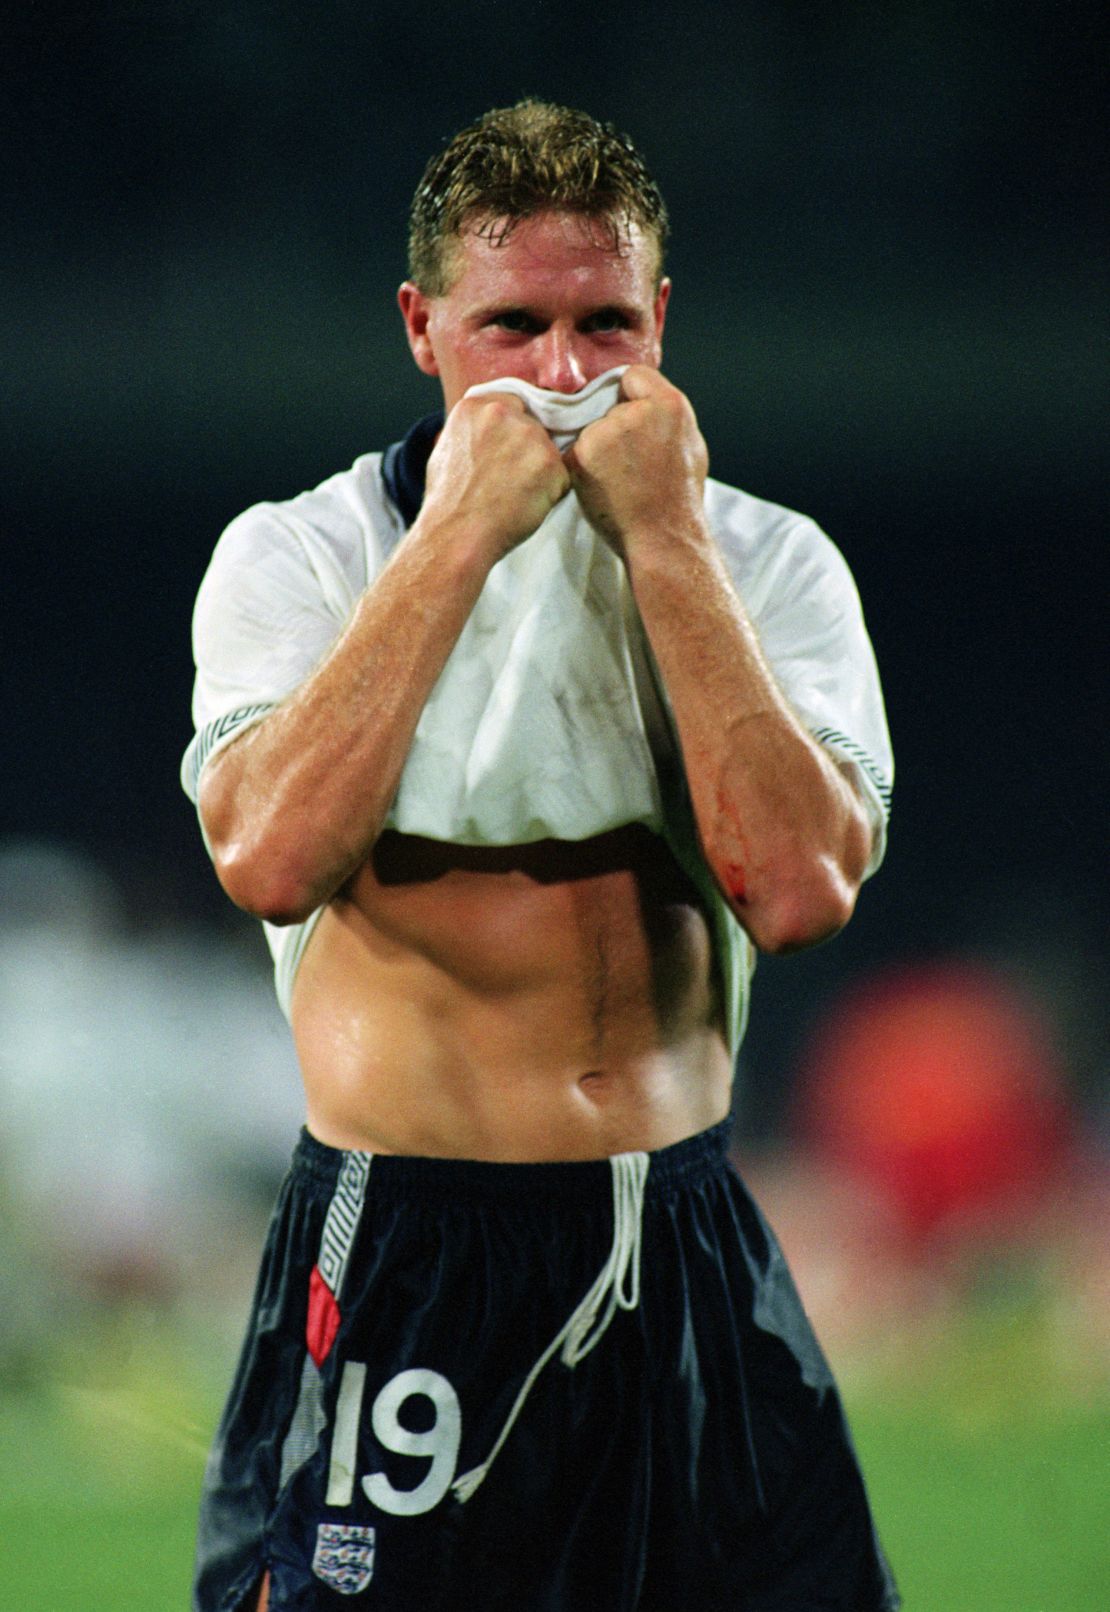 Gascoigne's tears made headlines as England exited the 1990 World Cup to Germany in the semifinals. 